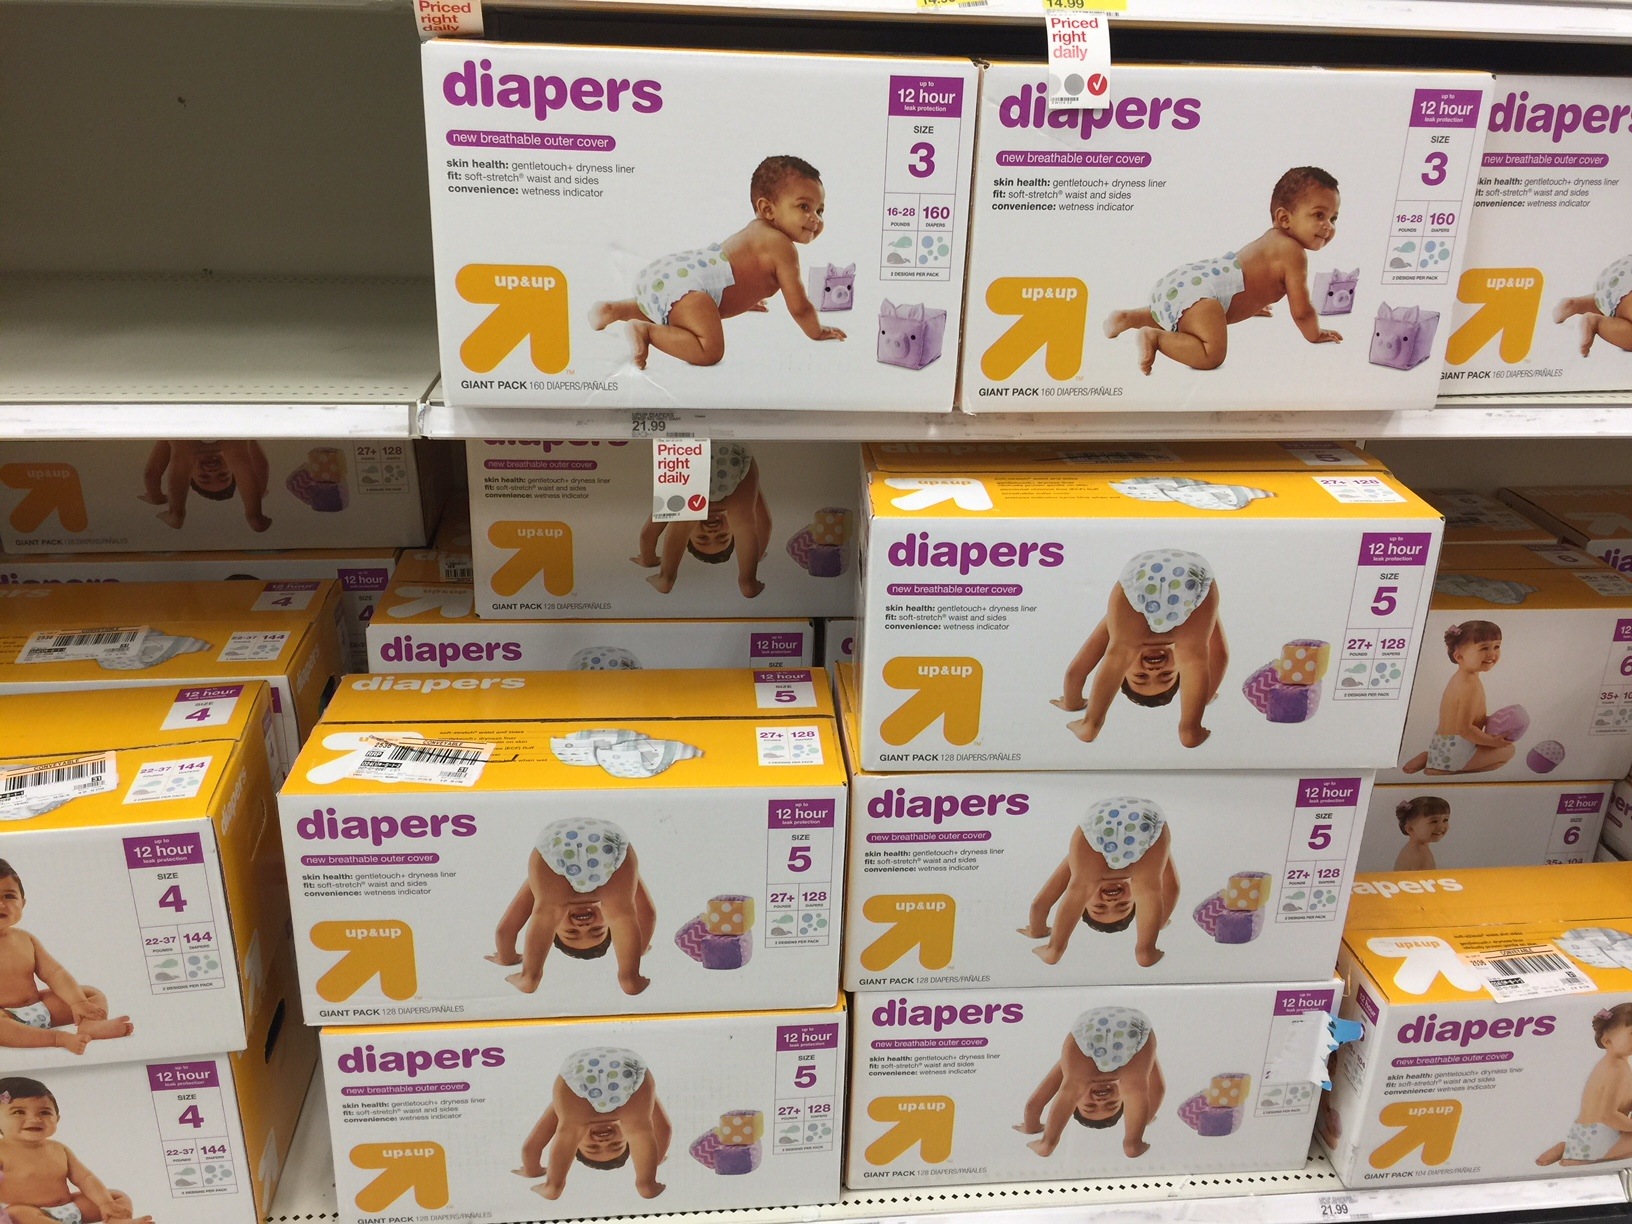 Up&Up diapers